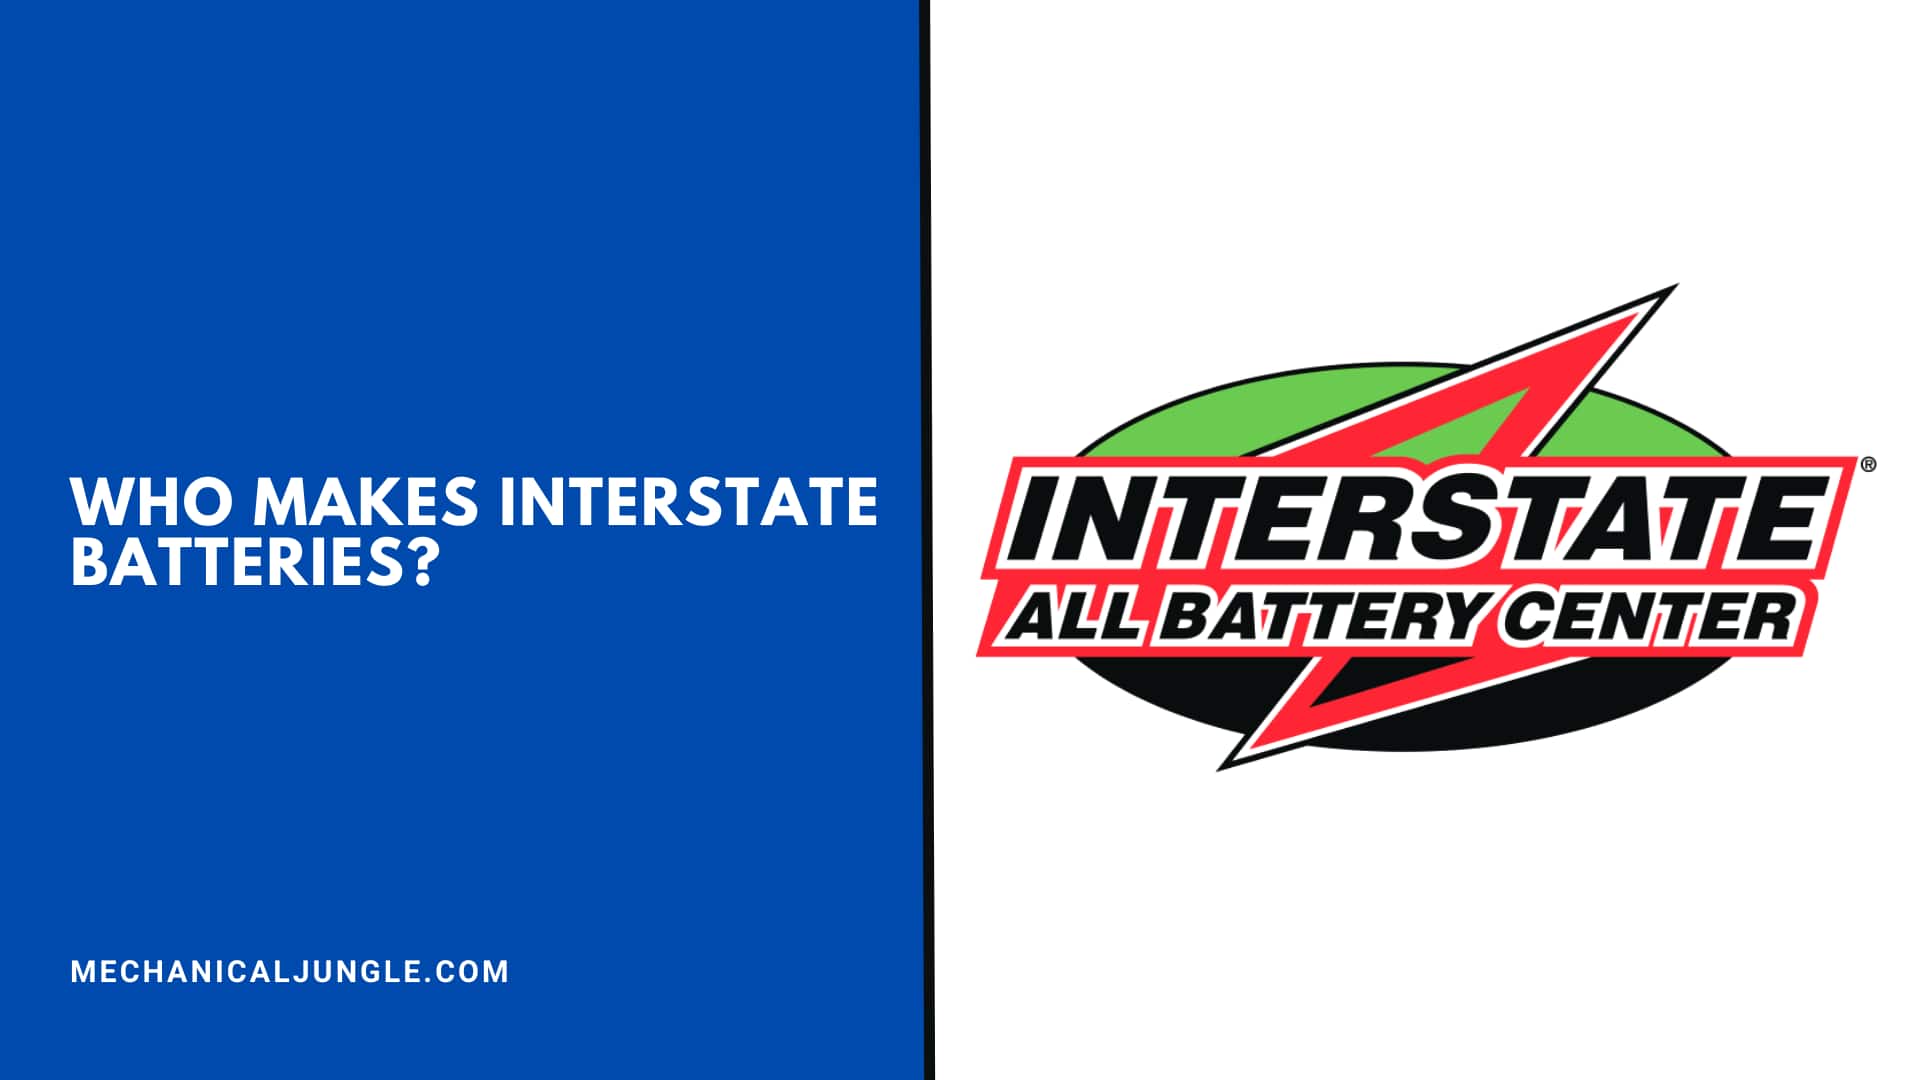 Who Makes Interstate Batteries?